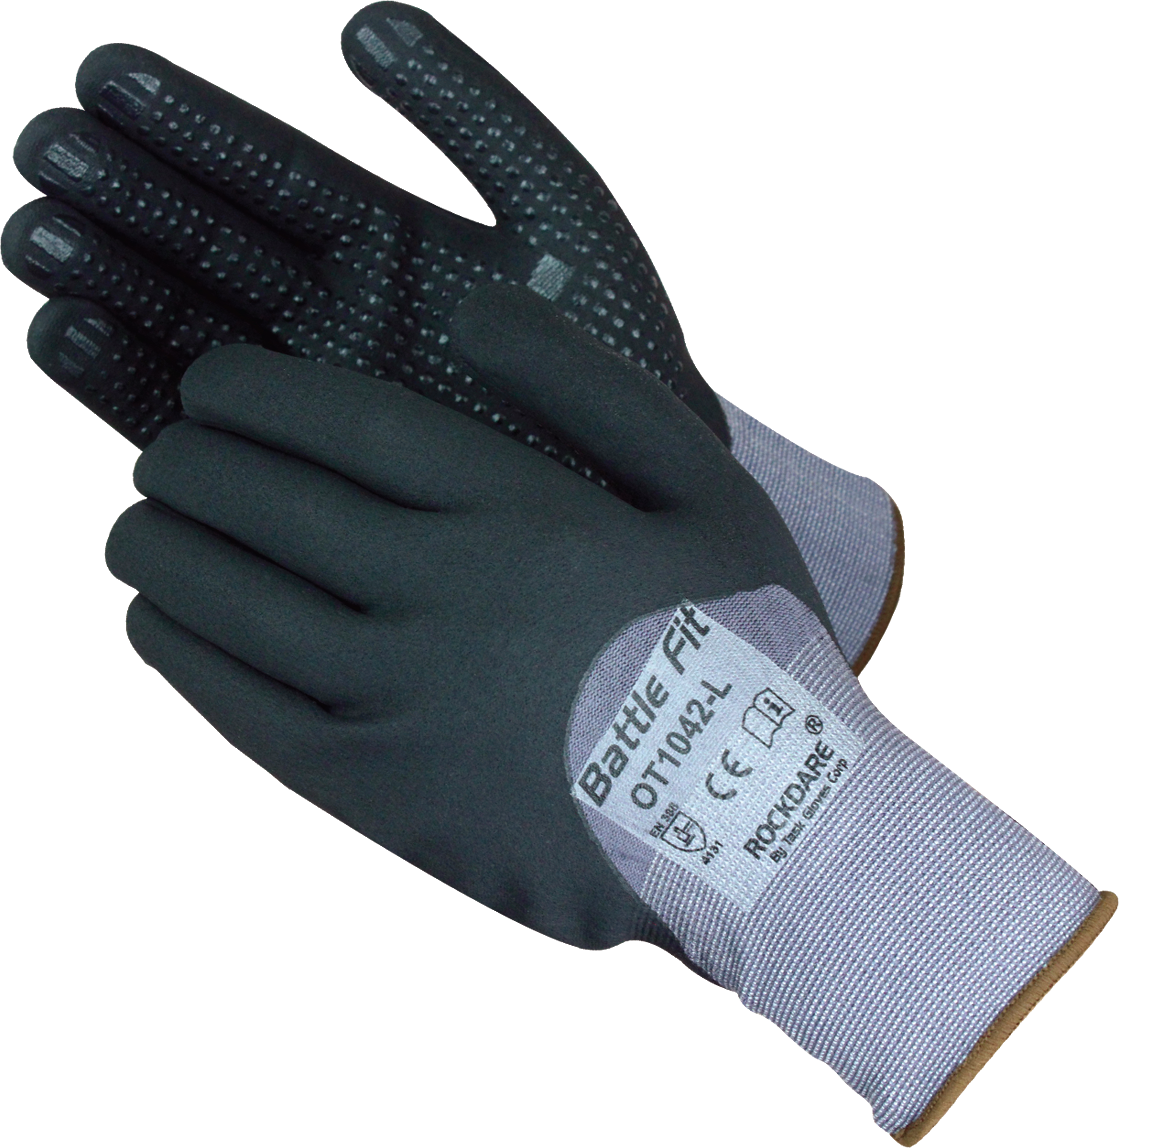 Task Gloves-Black Micro-Foam Nitrile Knuckle Coated with Nitrile Dots 15G Knit Gloves-eSafety Supplies, Inc